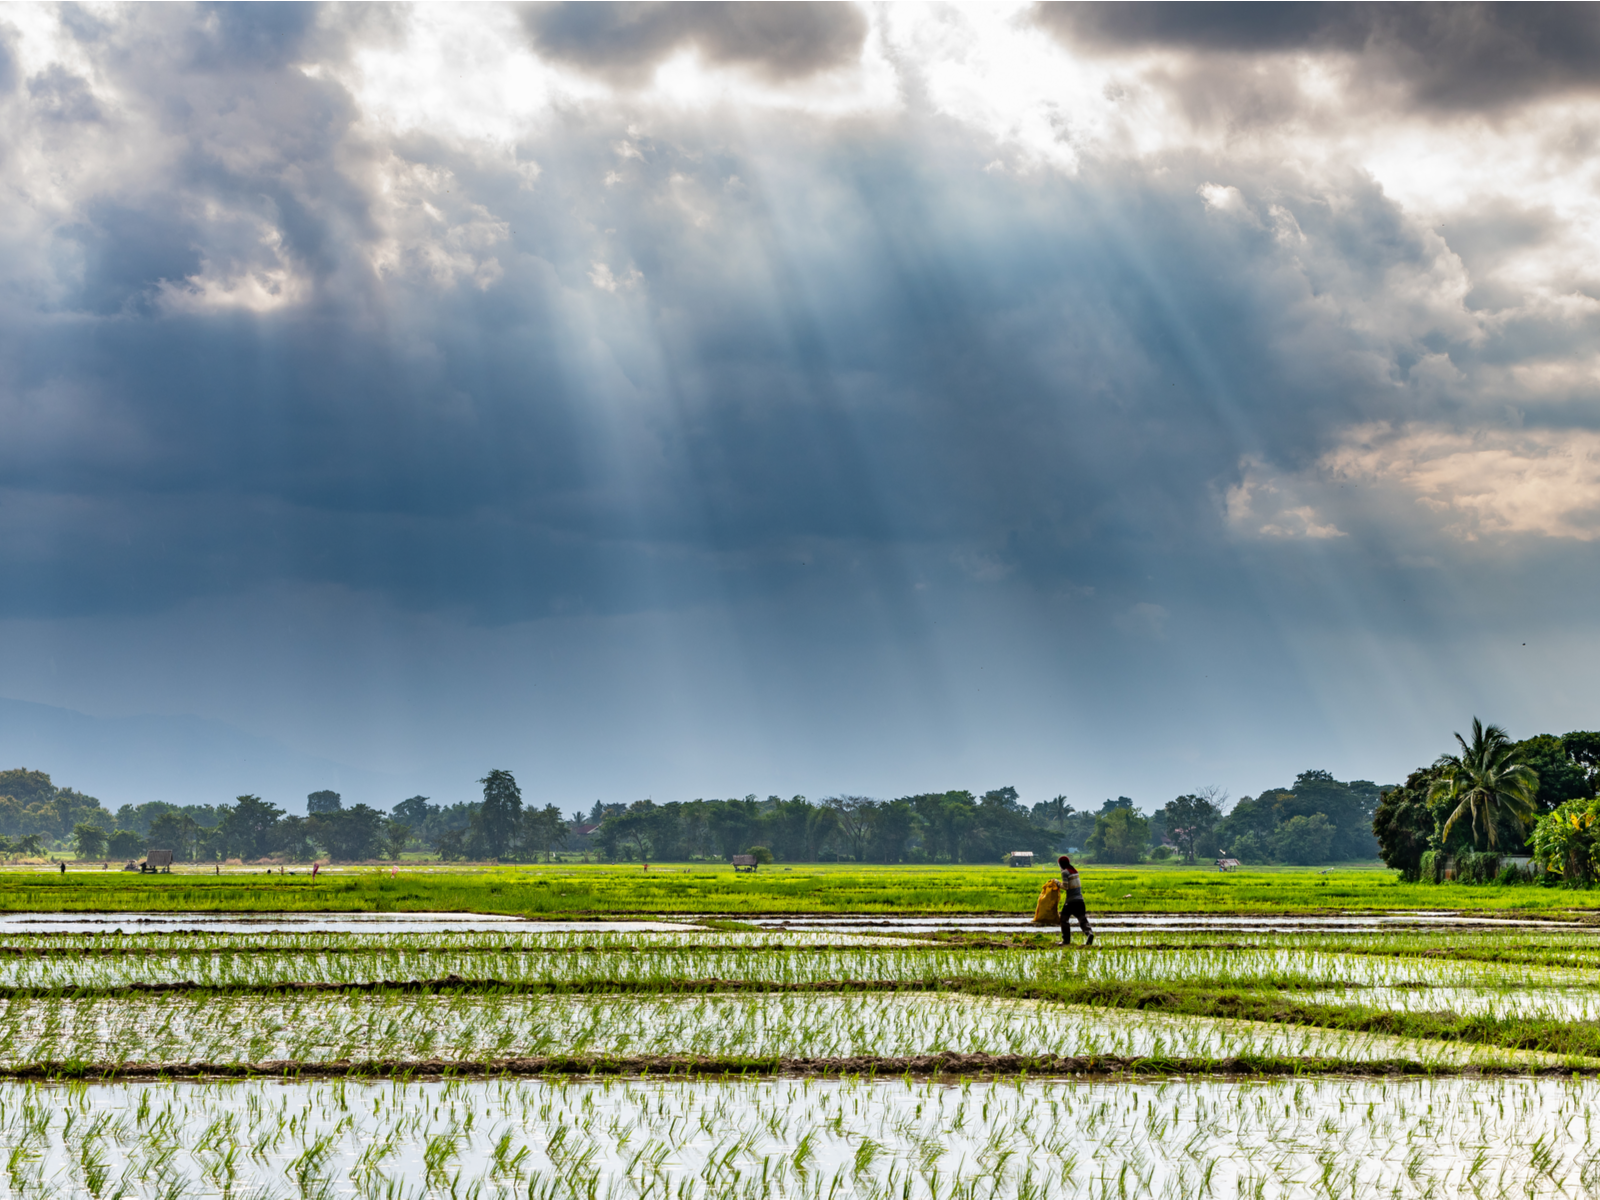 Guy in a rice paddy with rain and cloudy skies during the worst time to visit Thailand